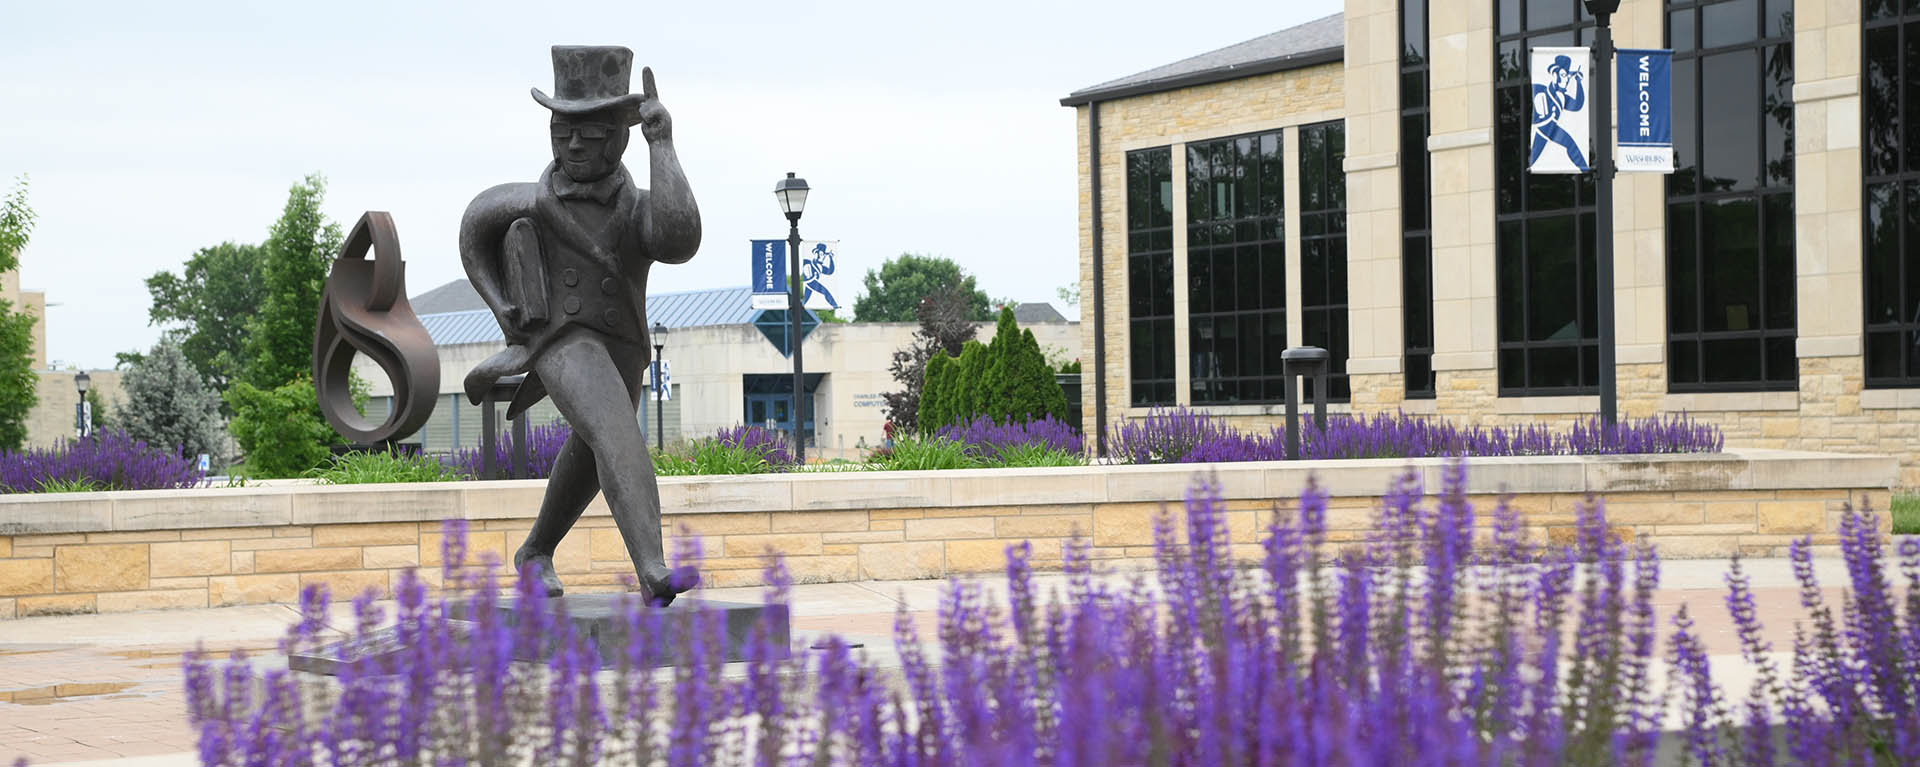 Purple flowers bloom in front of the Ichabod statue at the entrance of Morgan Hall.